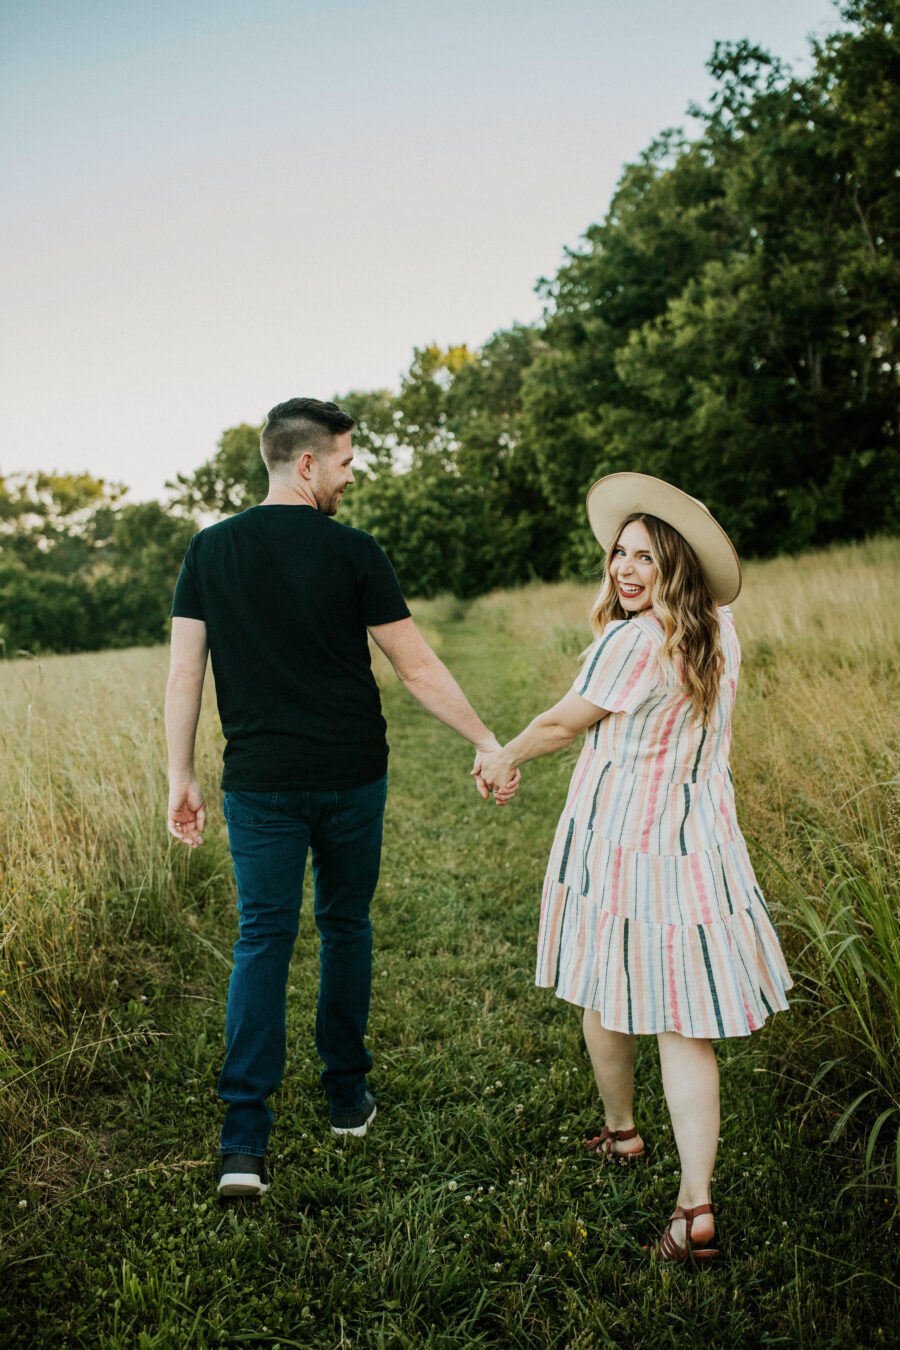 Sunlit Baby Announcement Photo Session featured on Nashville Baby Guide